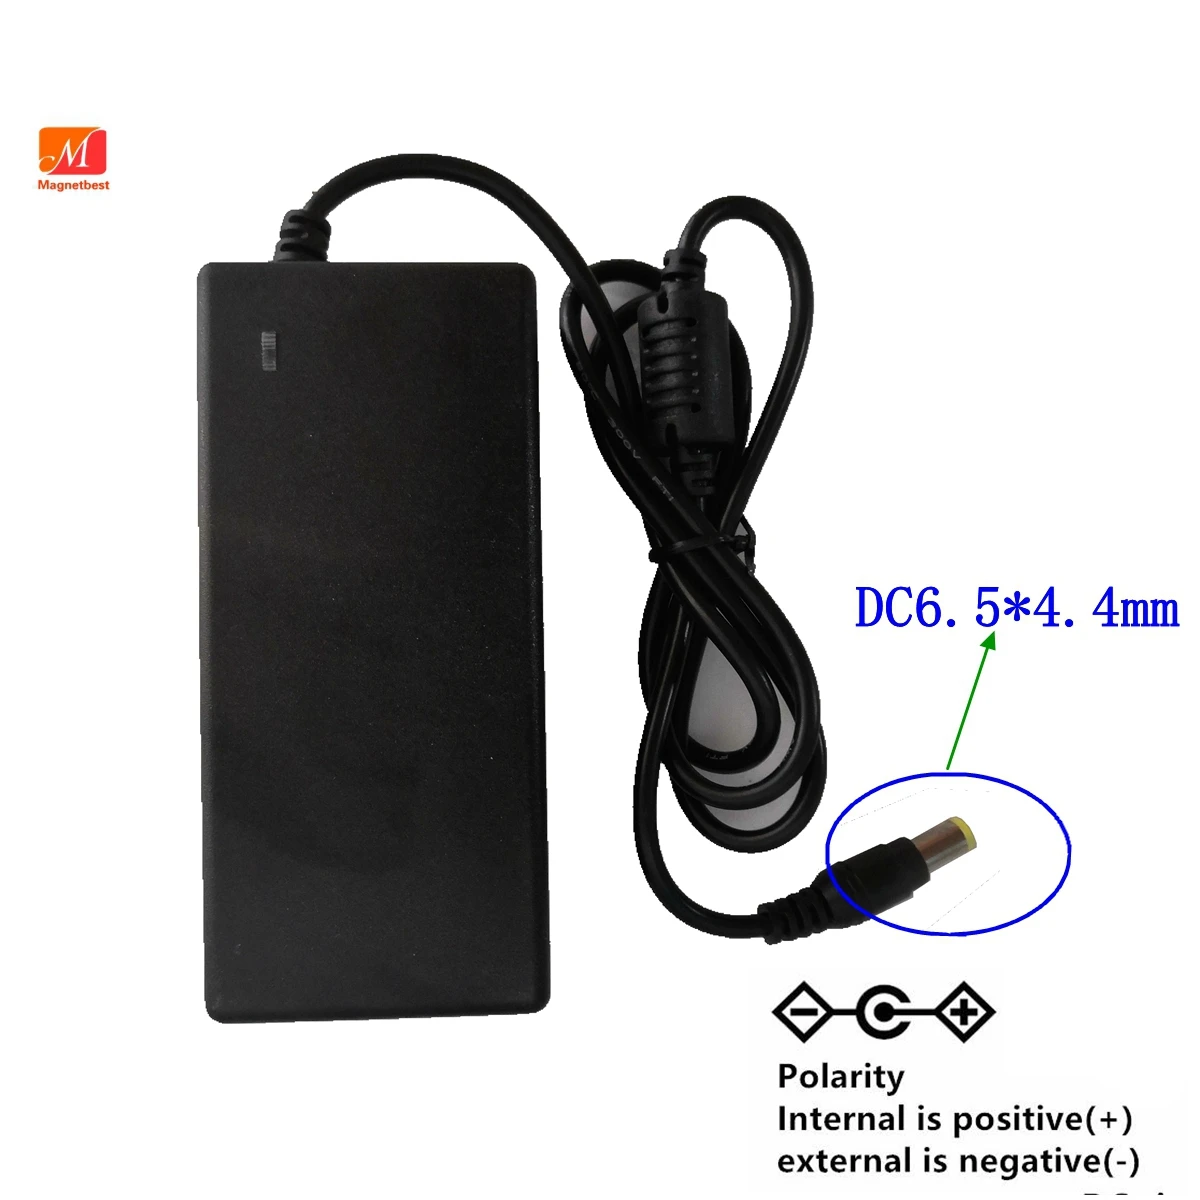 AC DC Adapter Charger 14V 1.79A 2.14A 3A 4A AC 100V 220V Converter to 14 volt Adaptor For Samsung Monitor Power Supply 36v lithium battery charger